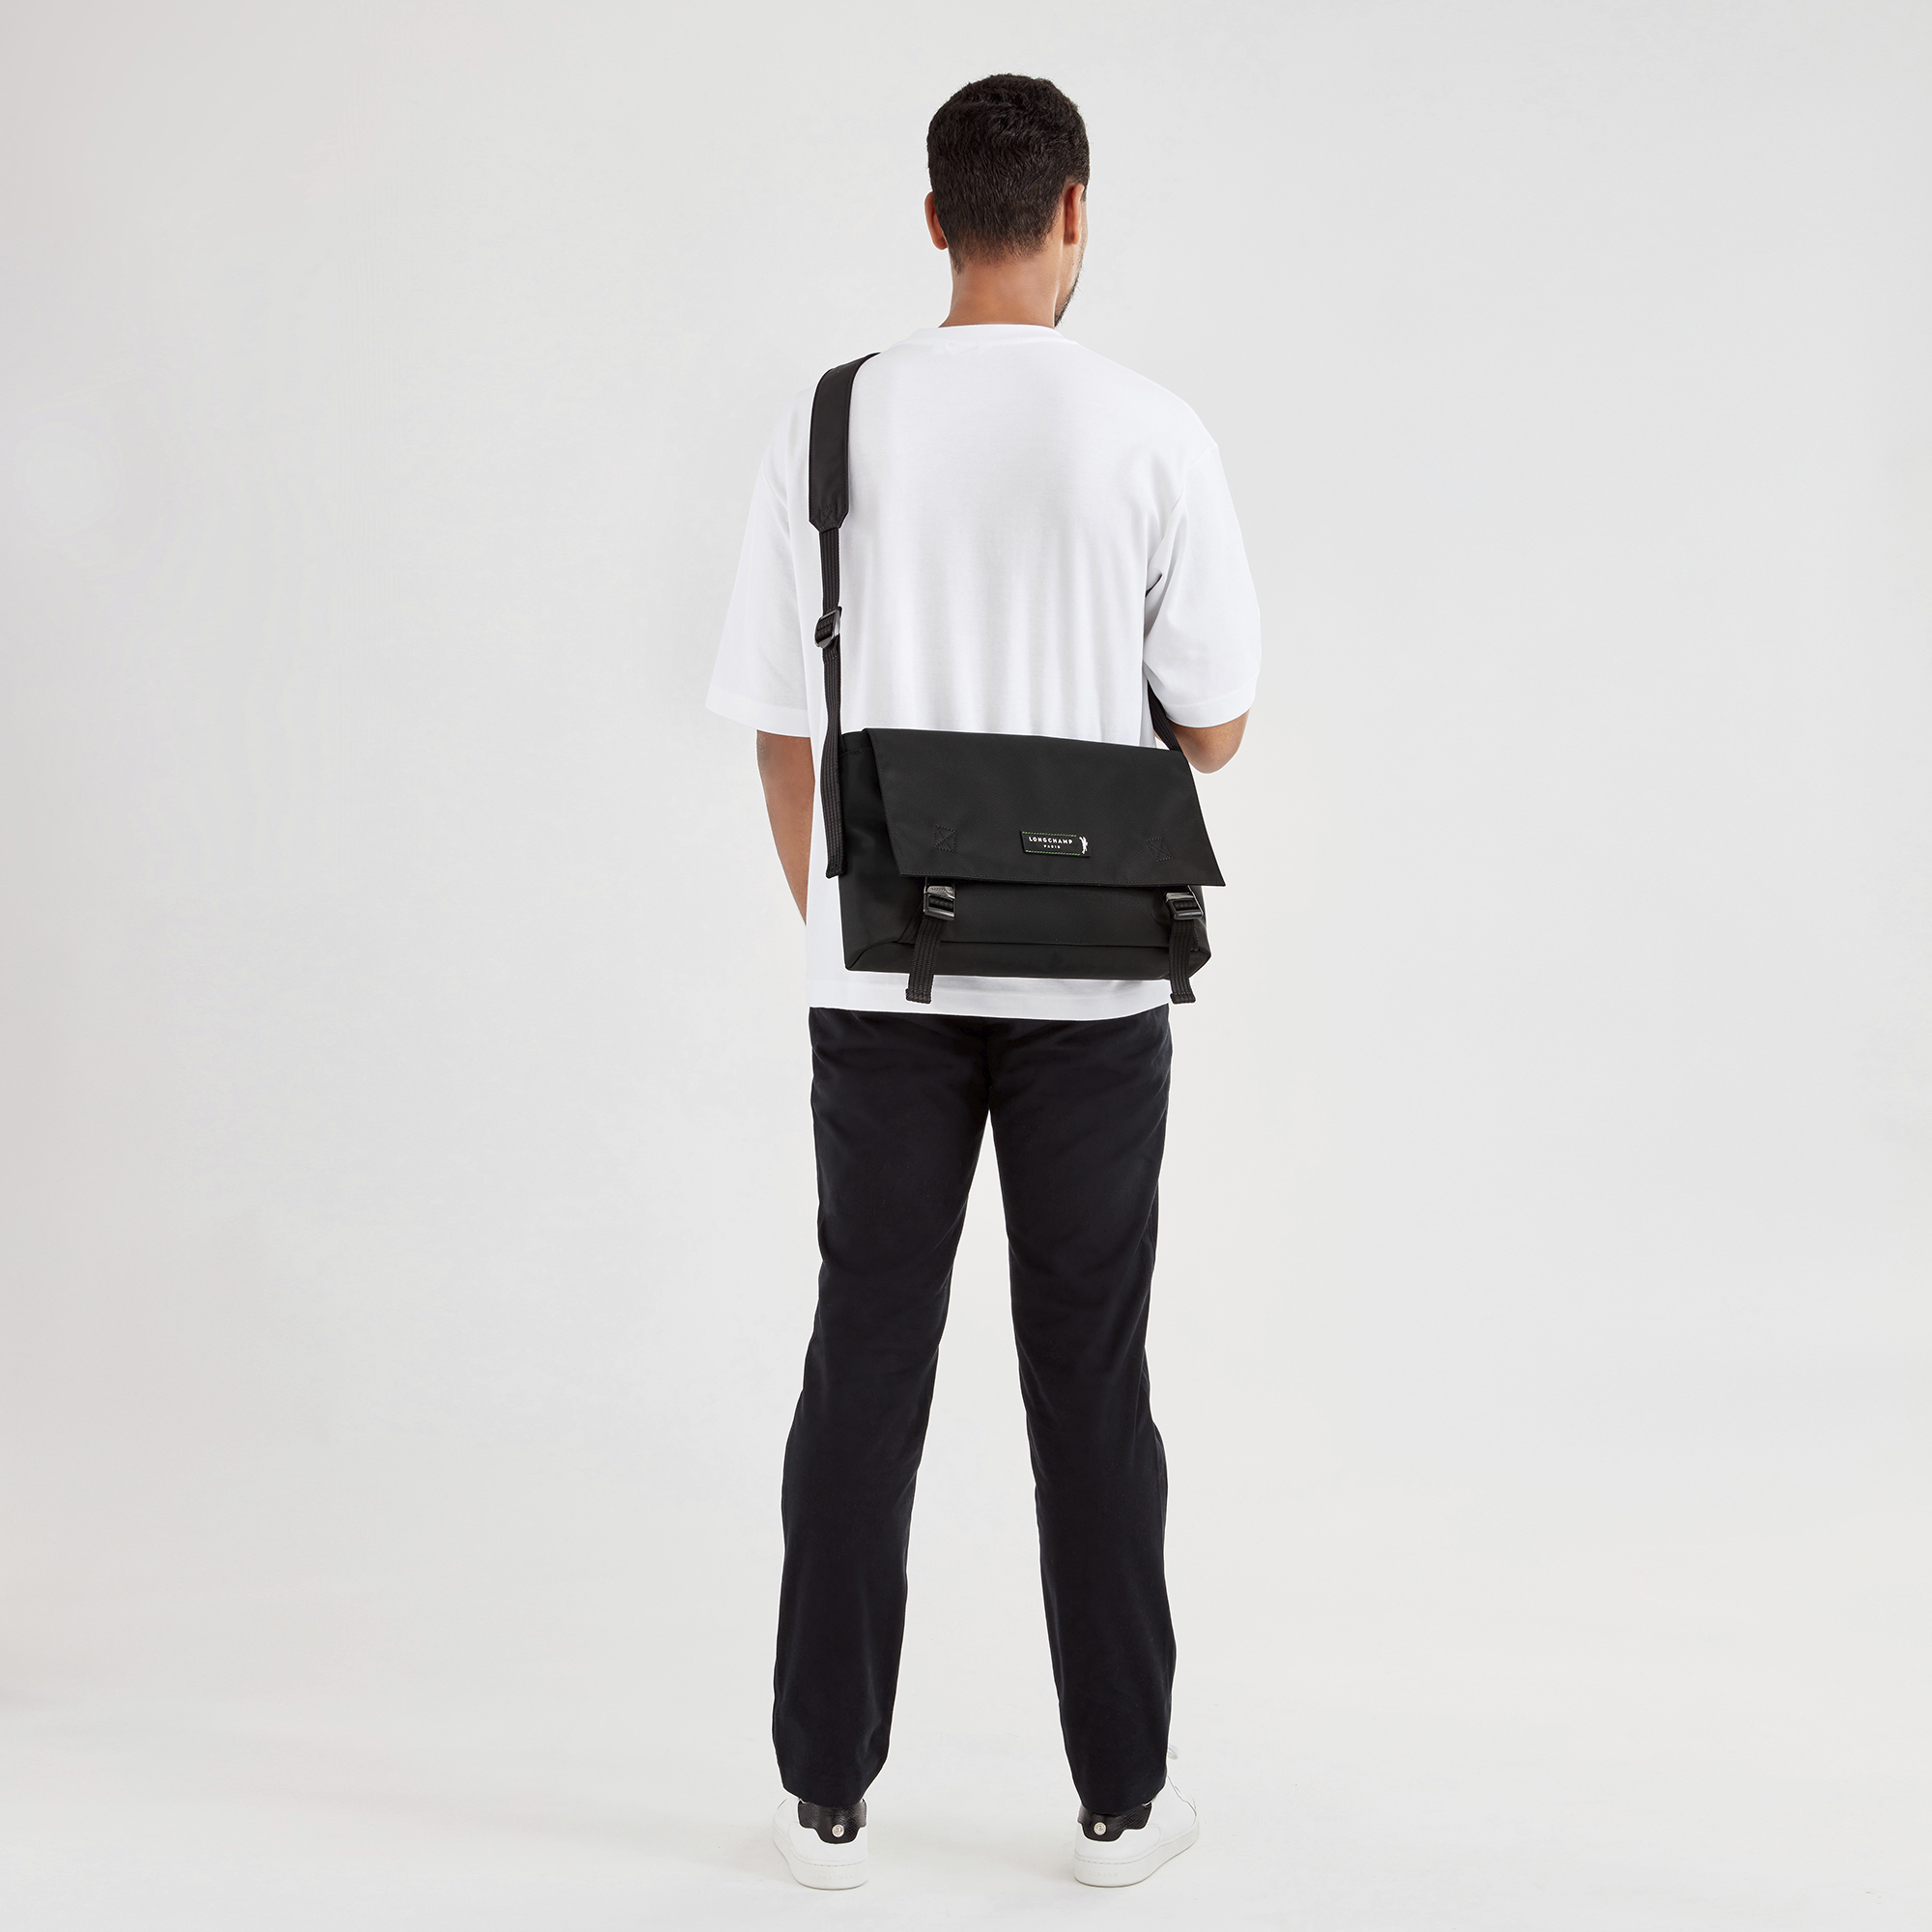 Le Pliage Energy L Backpack Black - Recycled canvas | Longchamp SG